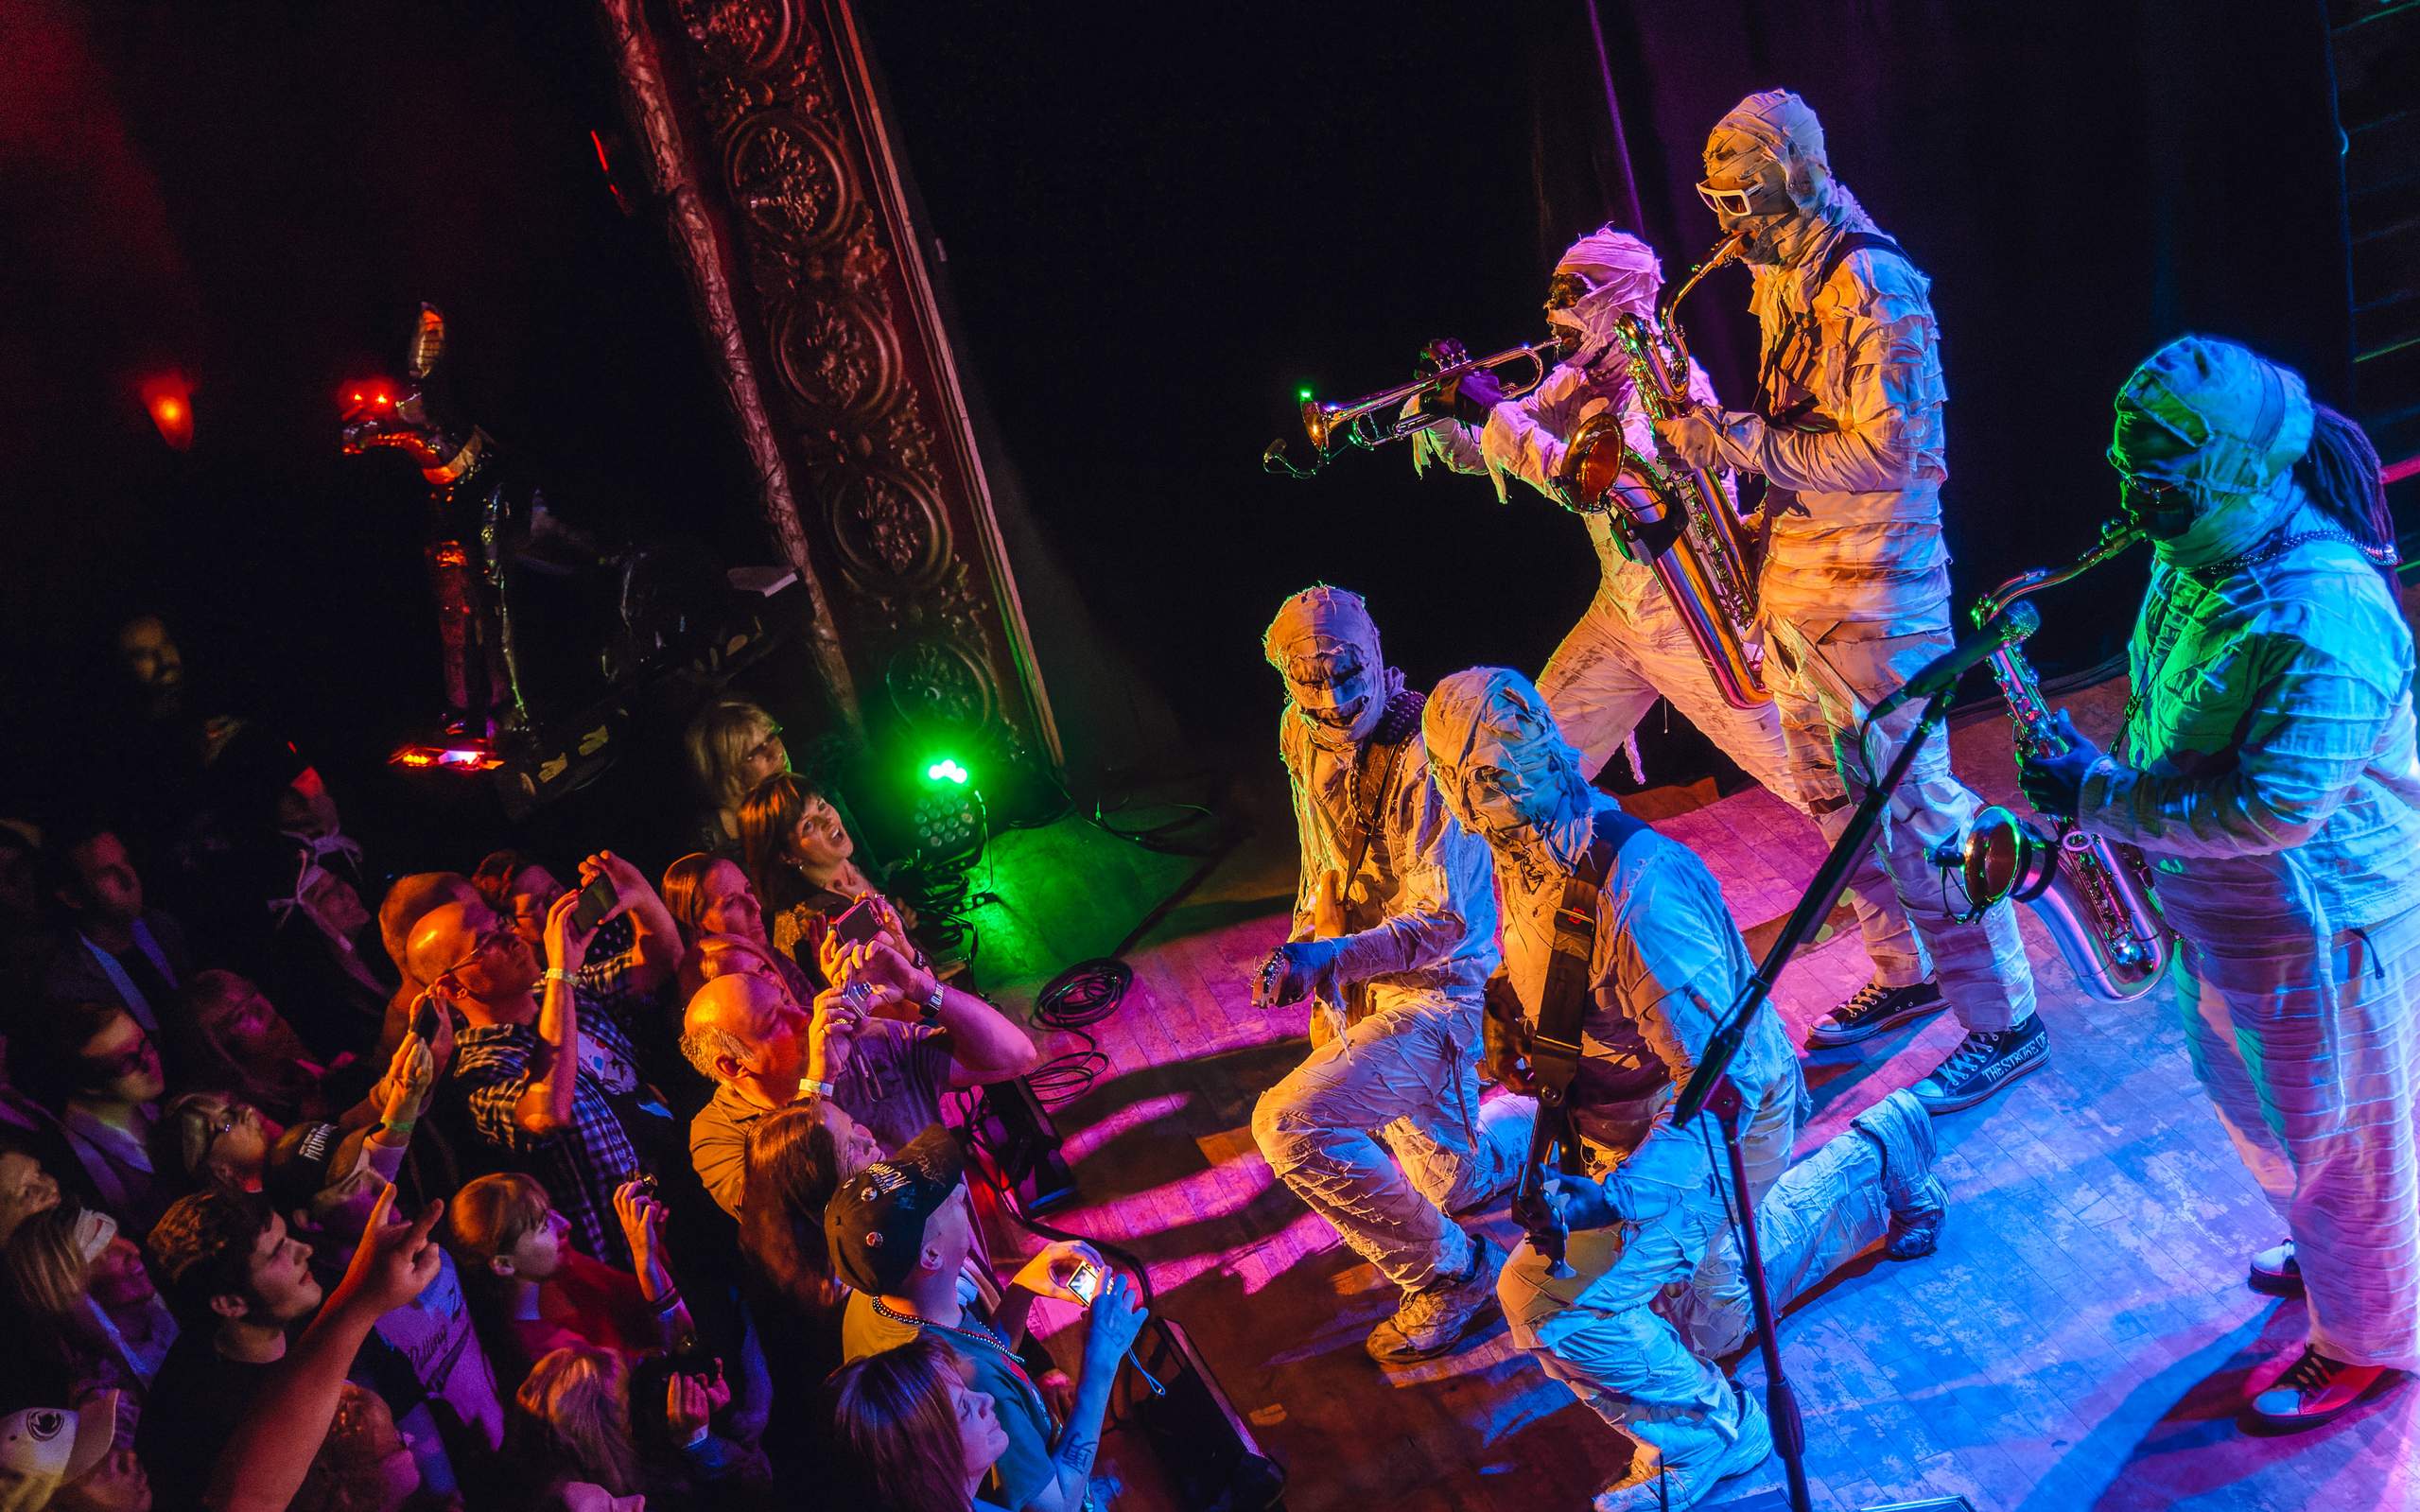 Here Come the mummies performing at The Majestic in Madison, WI October 19, 2013, photography by Ross Harried for Second Crop Music